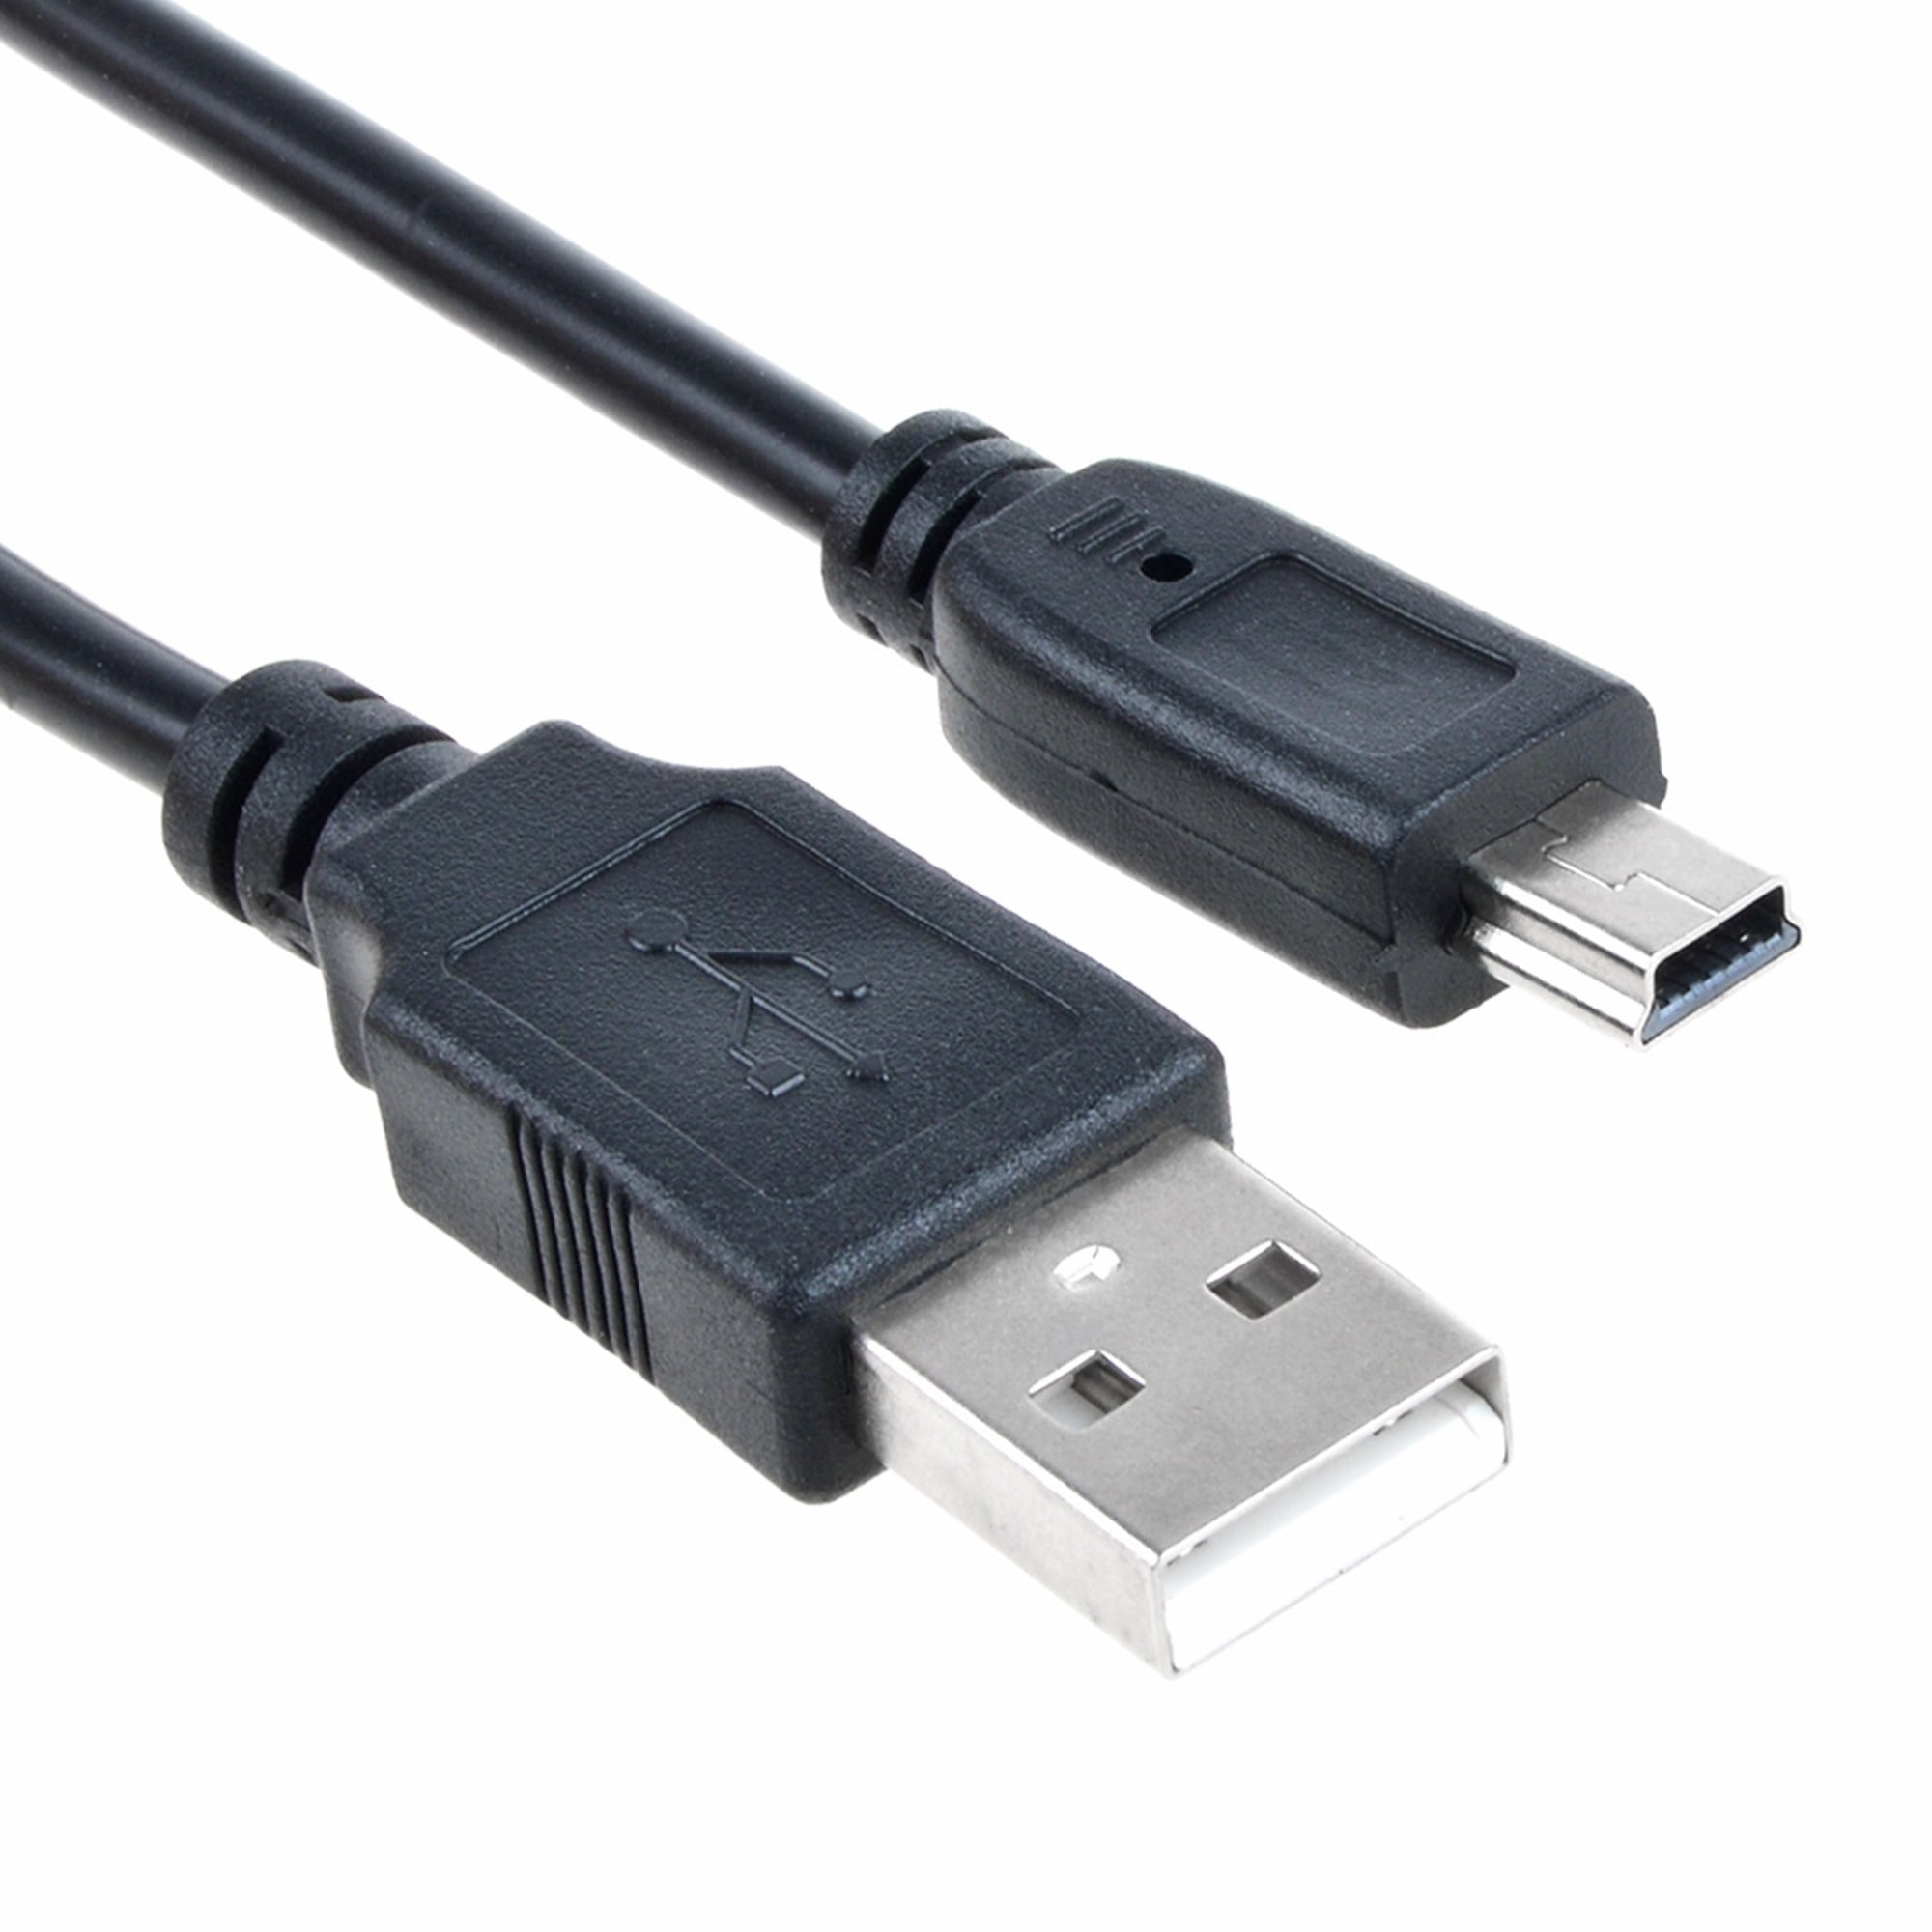 USB Data Sync Cable For Tom Tom Start 60 EUROPE TomTom PC Sync Lead 